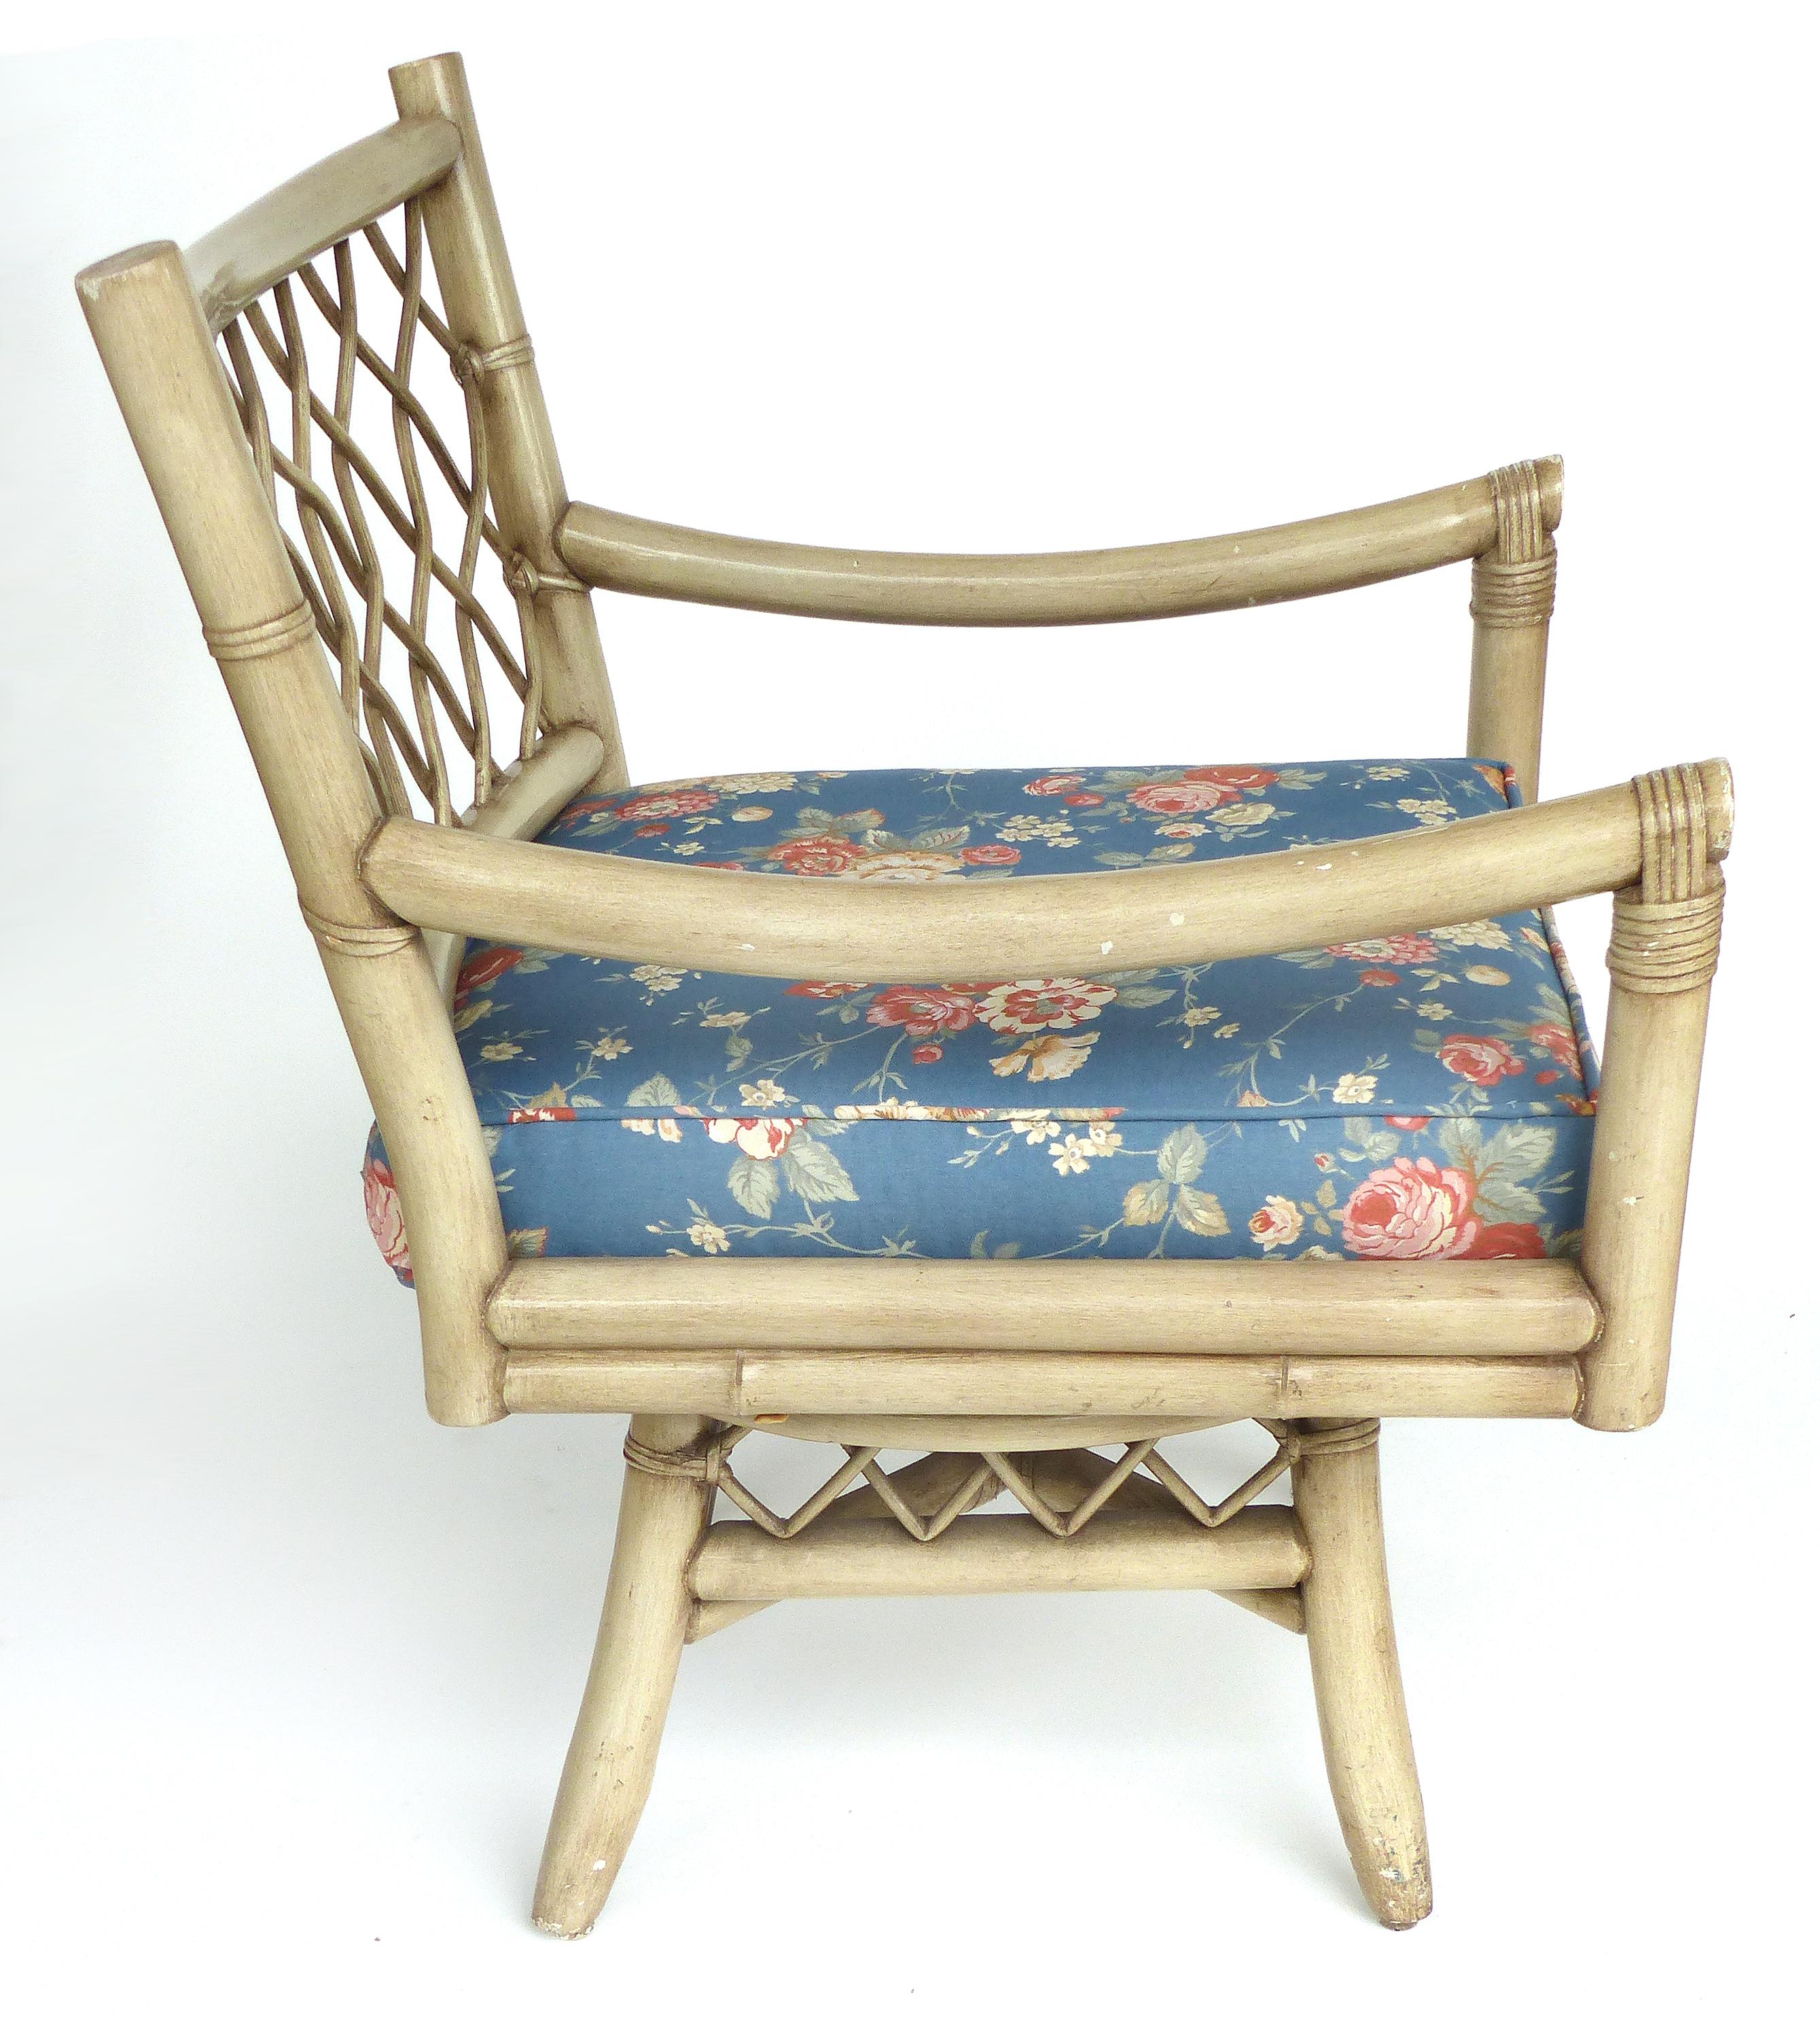 Fabric Vintage Bent Rattan Armchairs with Loose Cushions, Two Pair Available